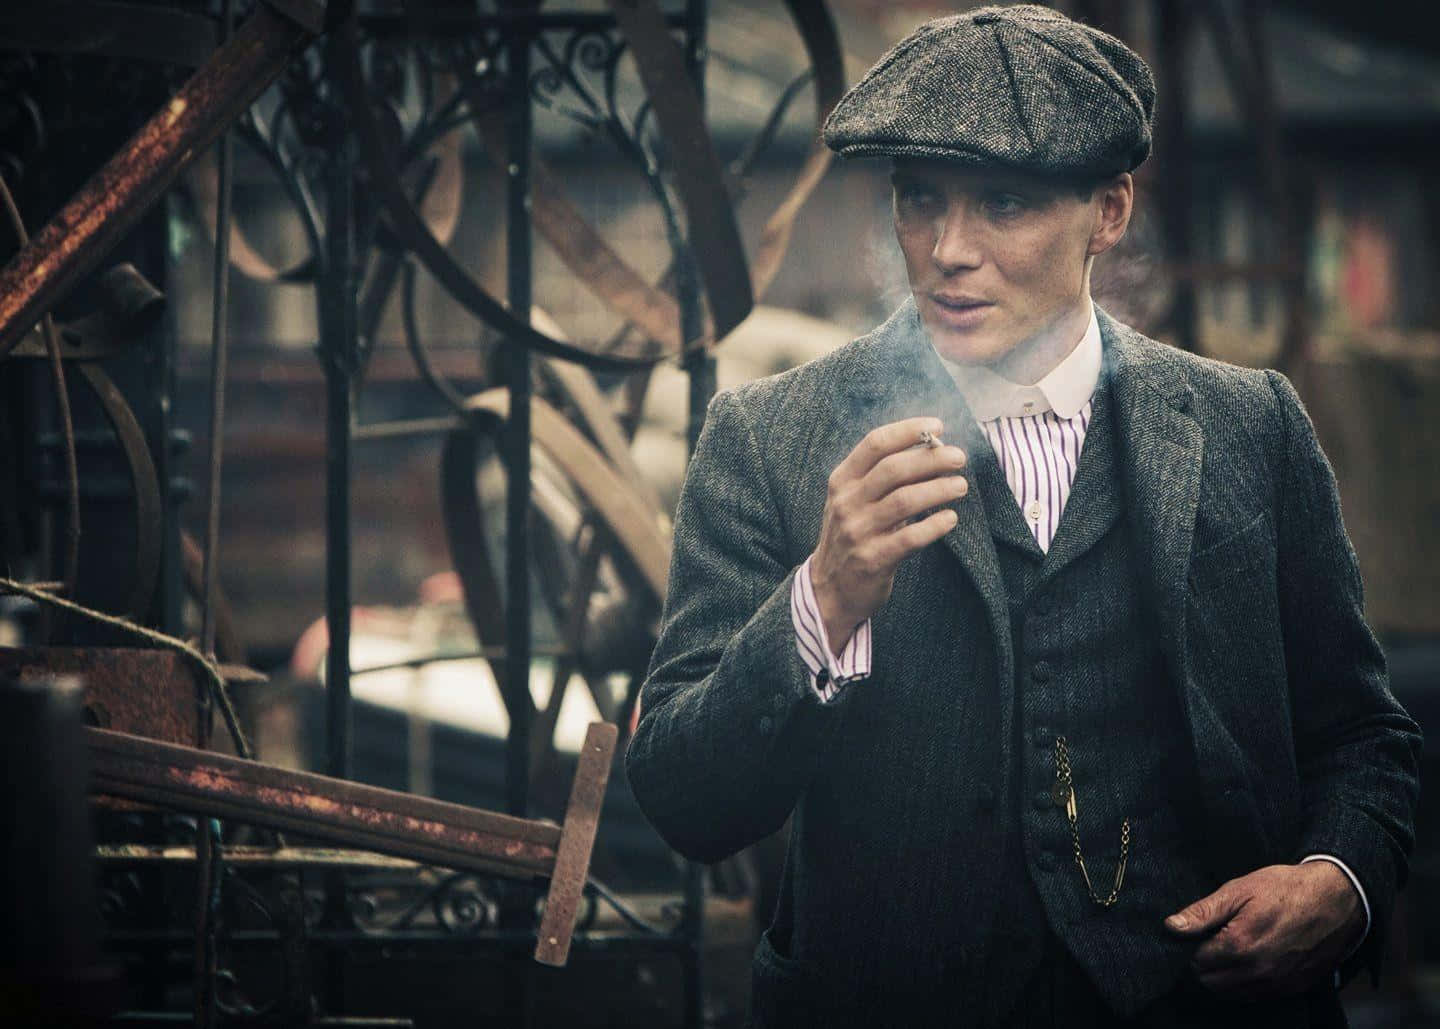 A Glimpse Into the World of Peaky Blinders